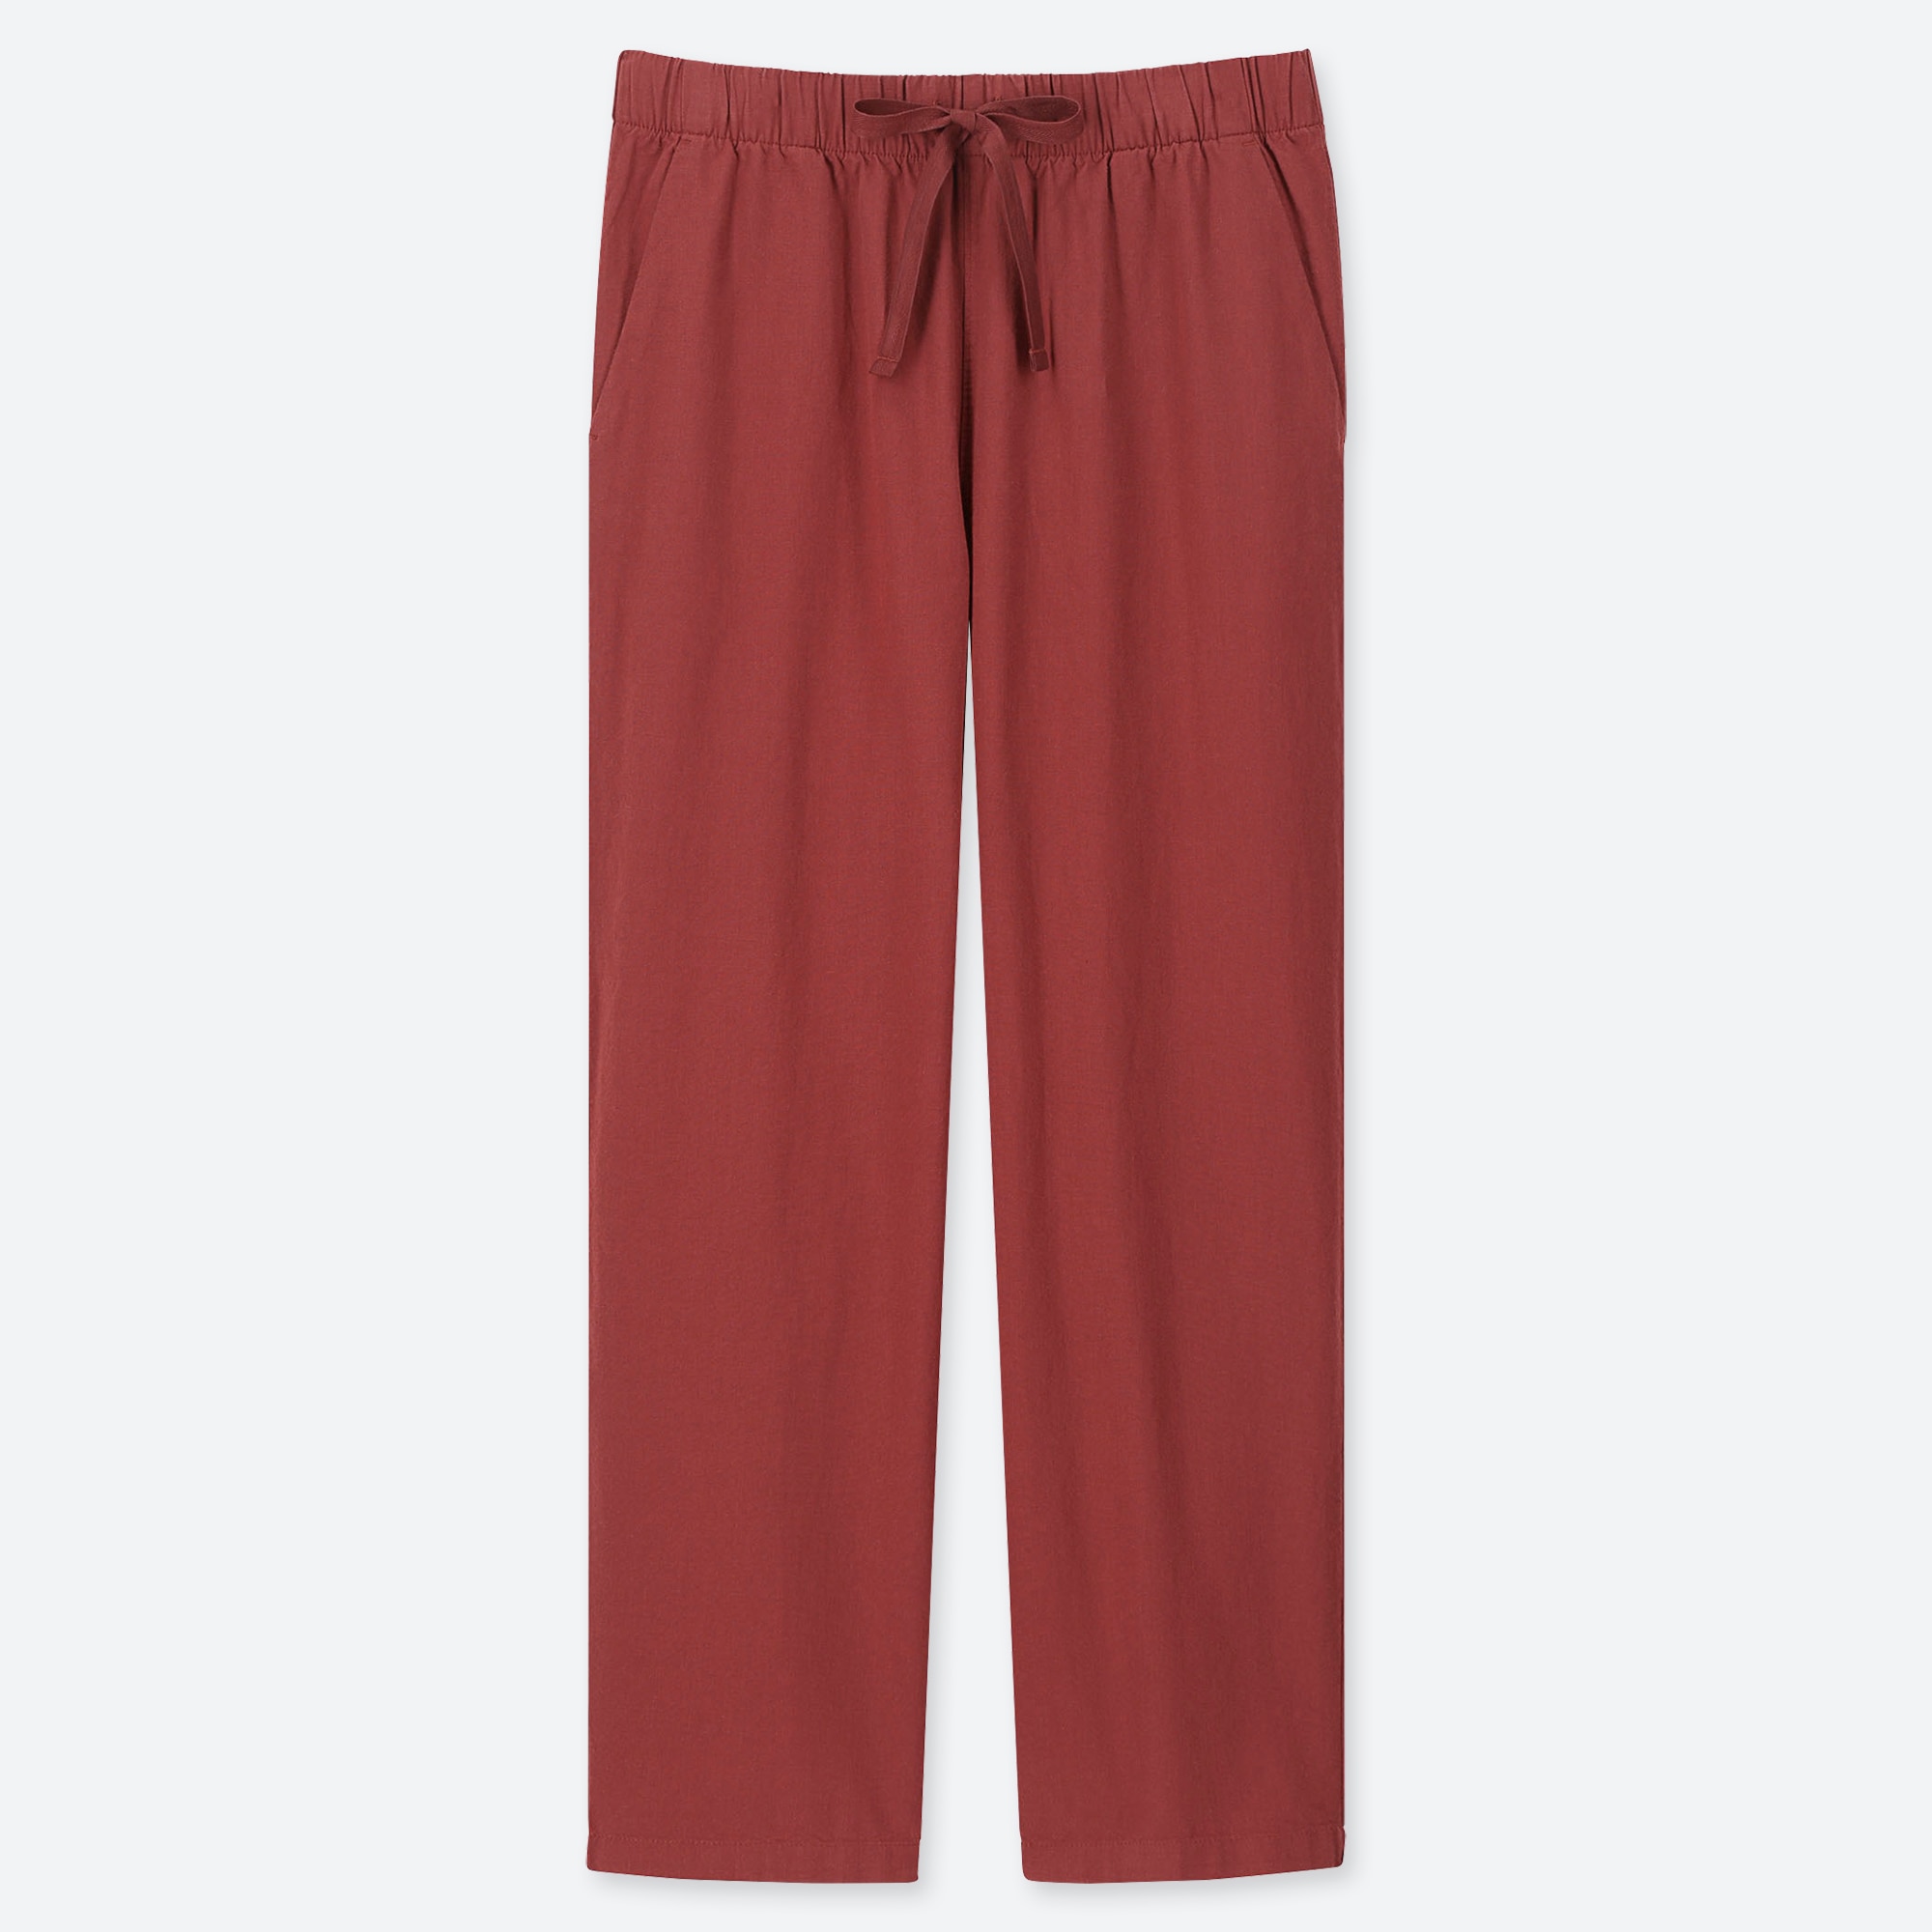 WOMEN COTTON RELAX ANKLE-LENGTH PANTS